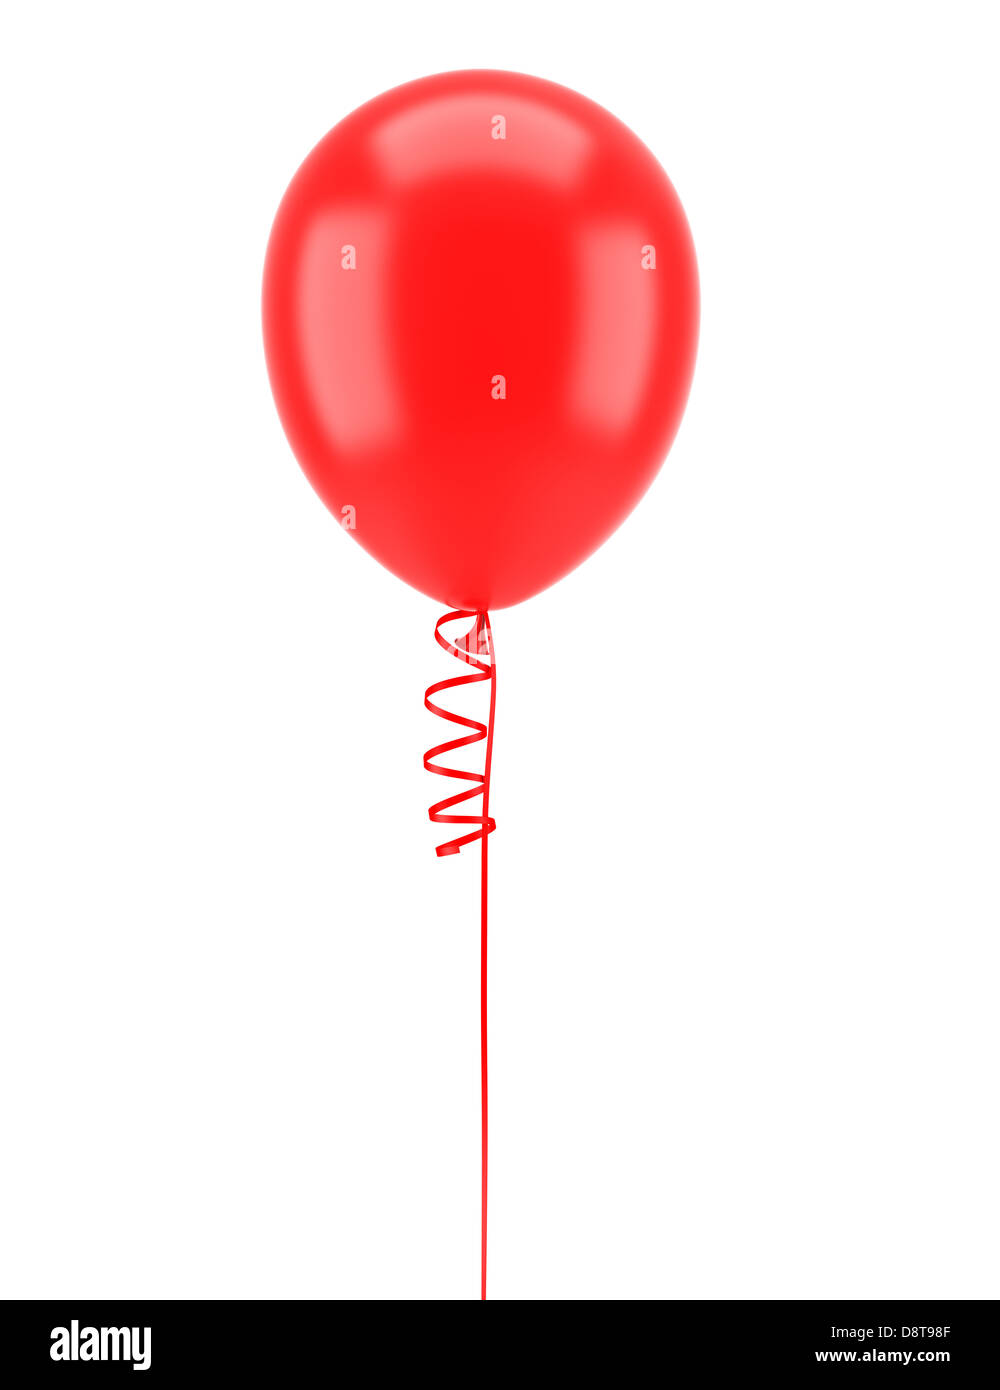 https://c8.alamy.com/comp/D8T98F/one-red-party-balloon-with-ribbon-isolated-D8T98F.jpg